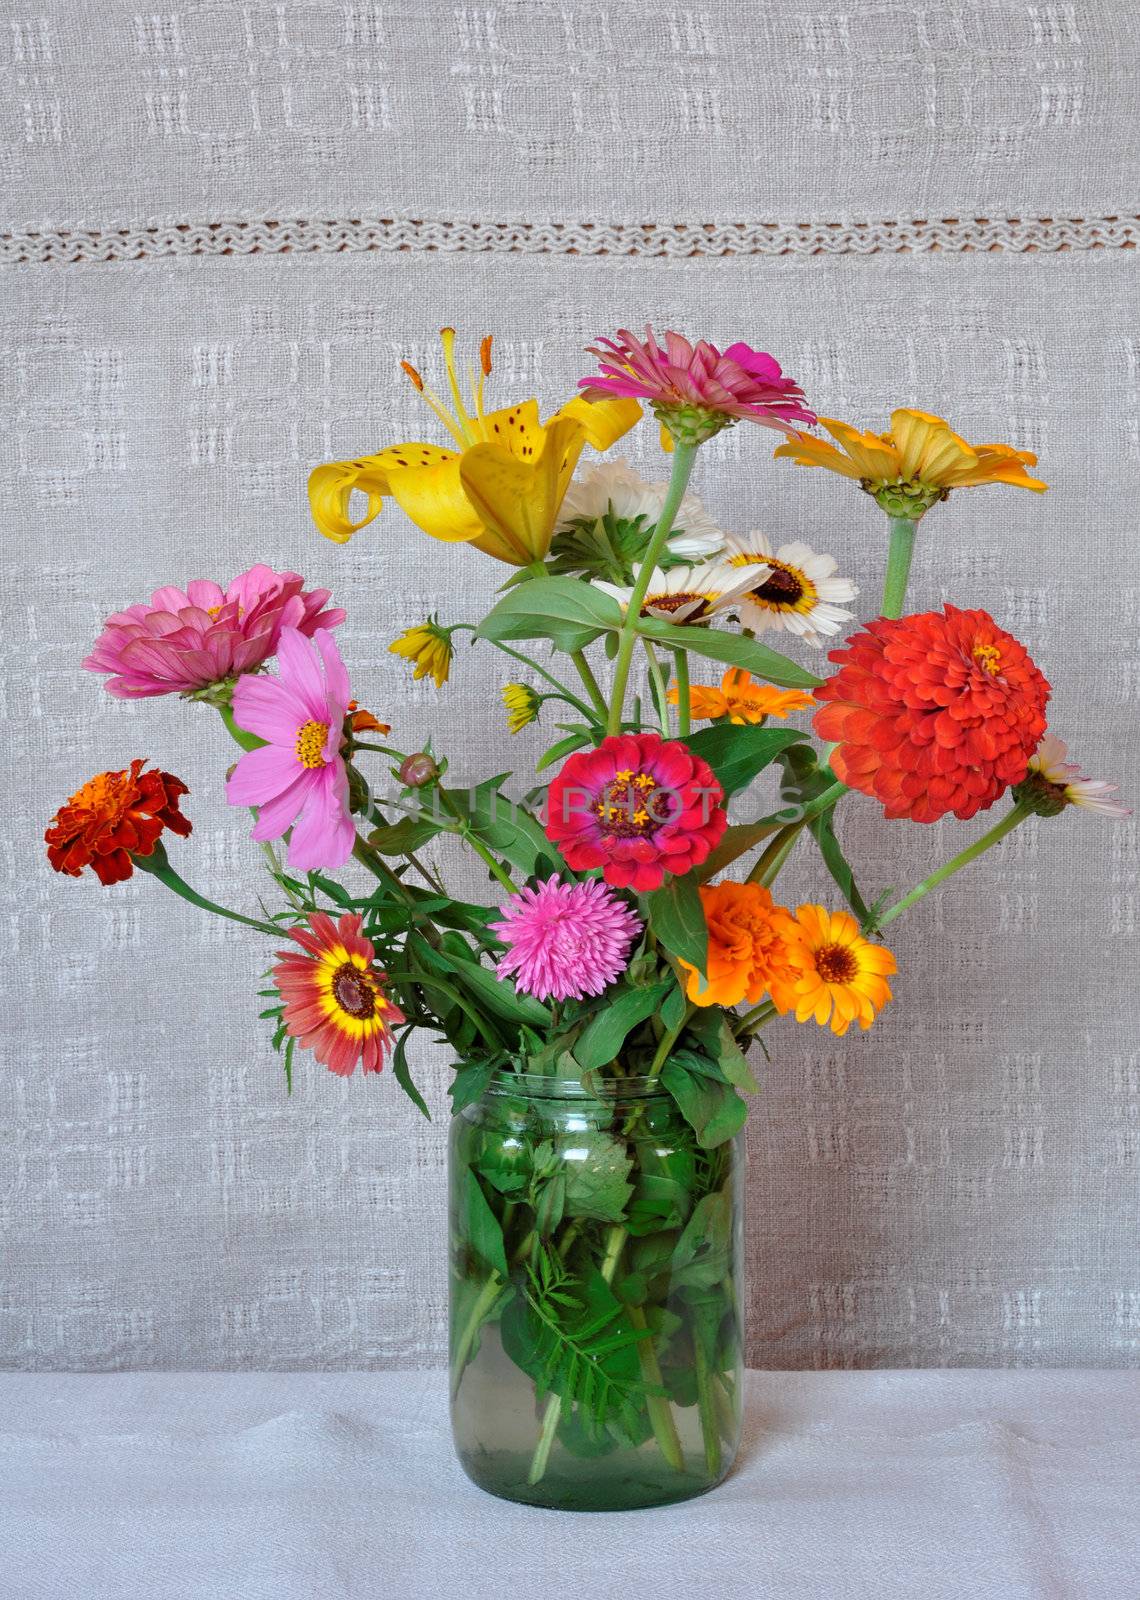 A bouquet of garden flowers in a glass jar on the background of an old linen canvas. August, the Central Russia